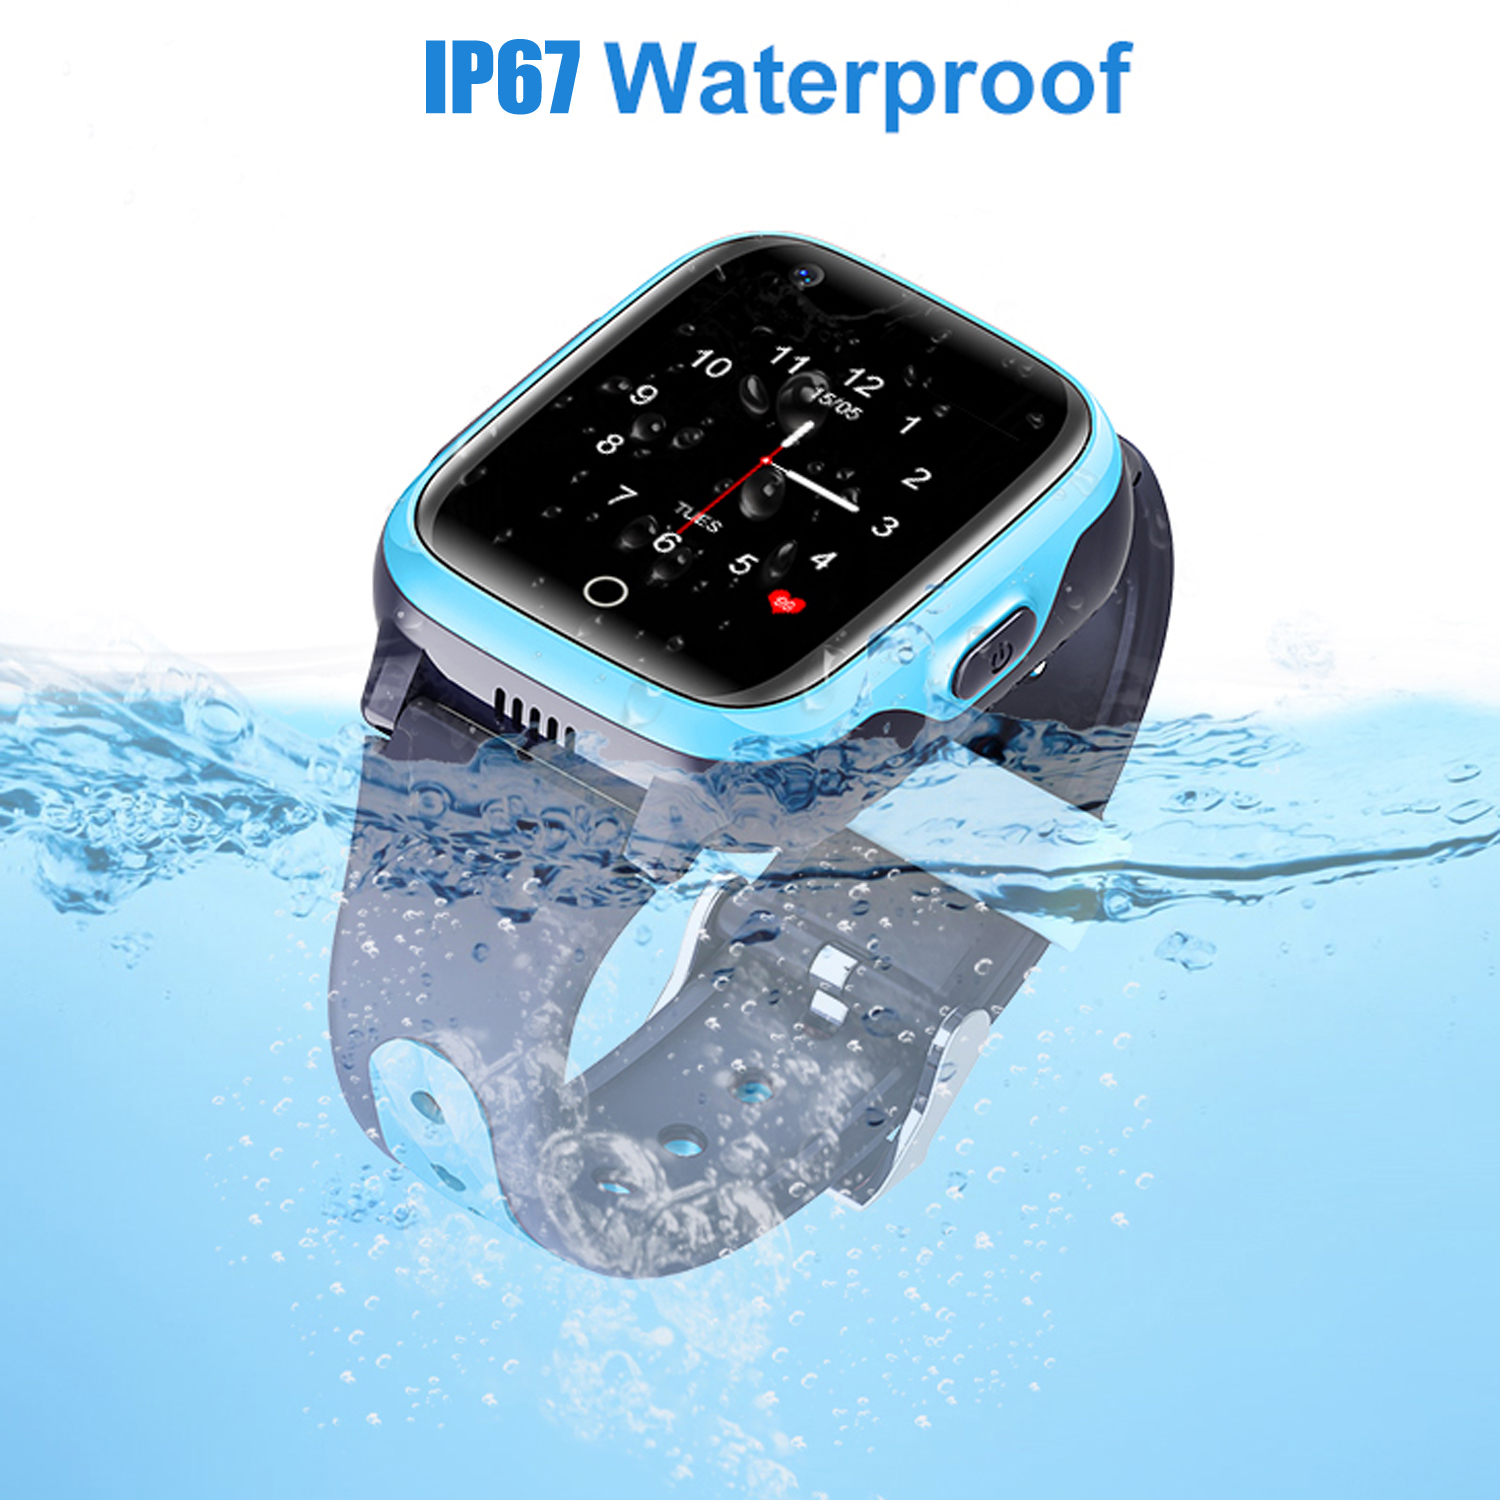 Factory Supply 4G IP67 Waterproof Android WiFi Kids Baby Security Smart Watch Child Children GPS Tracker with Video Call D31